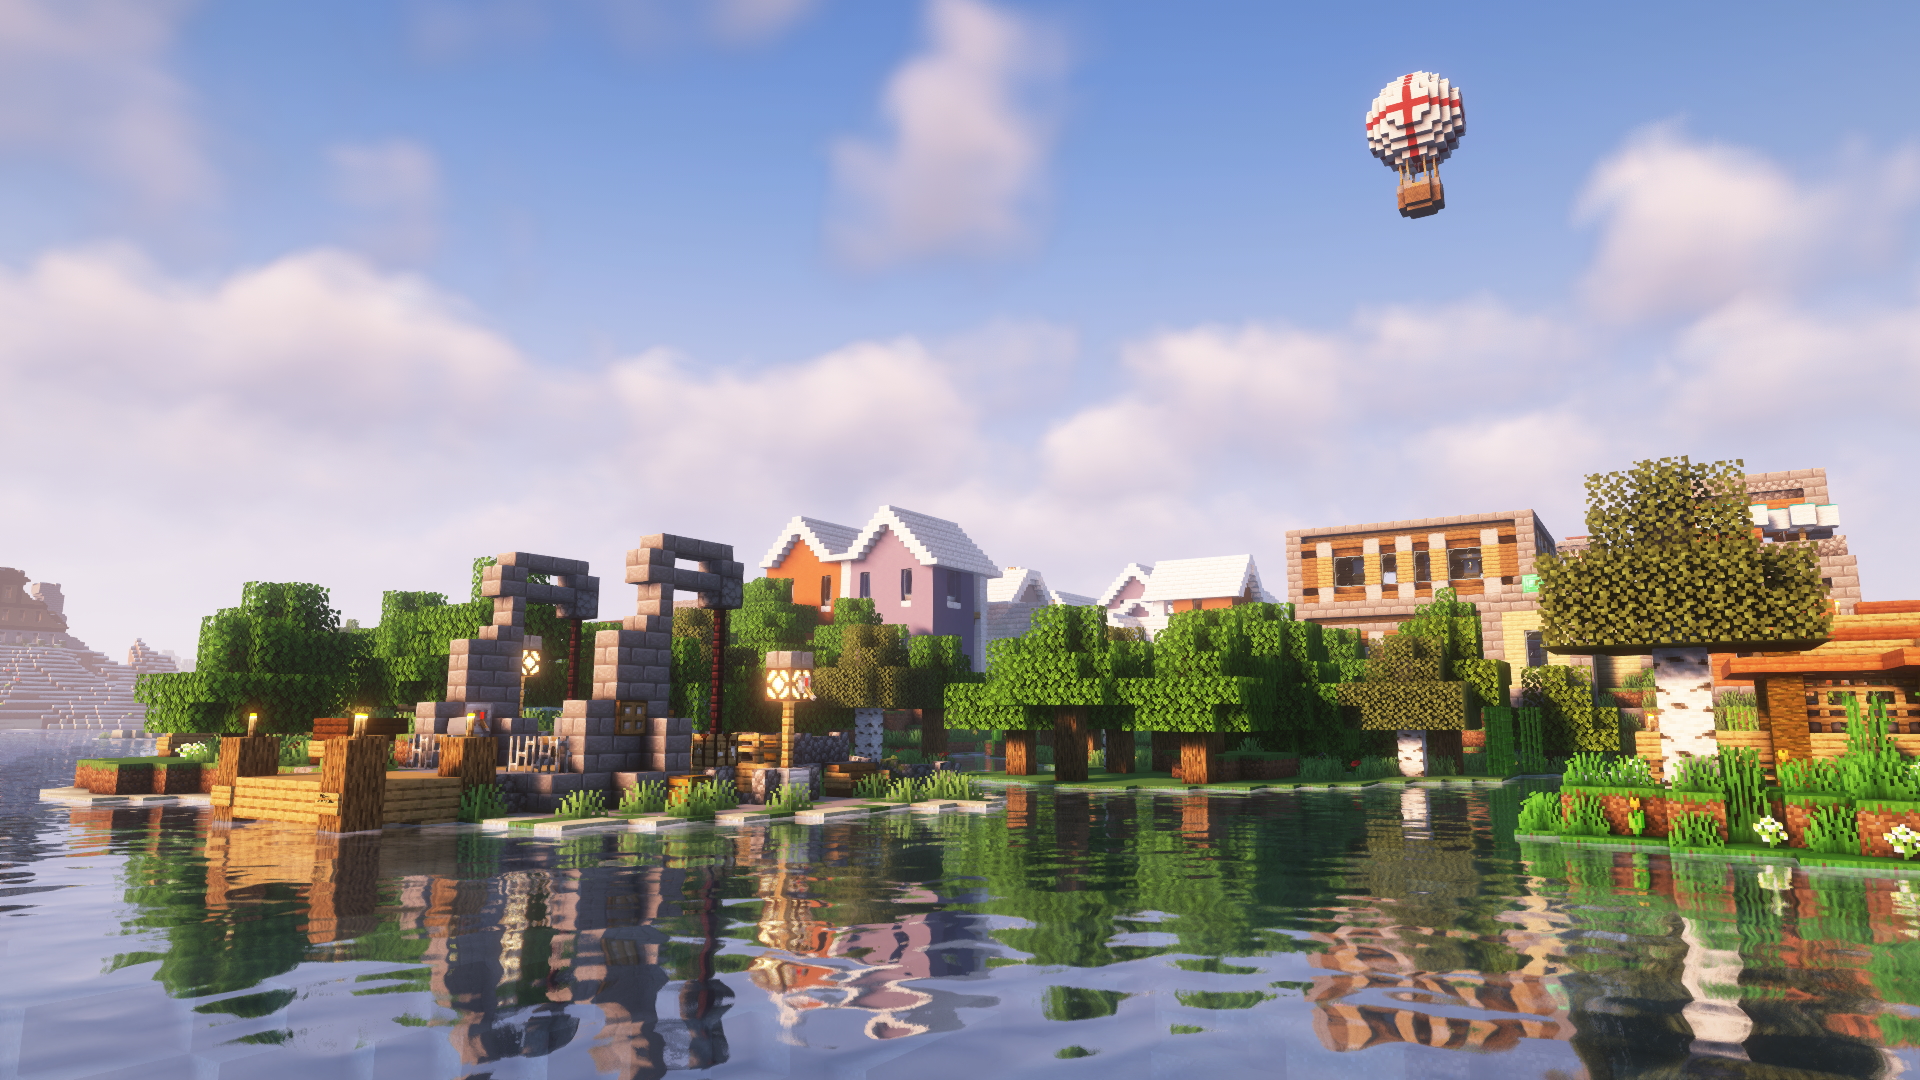 General 1920x1080 Minecraft shaders water video games sky clouds cube village trees hot air balloons CGI